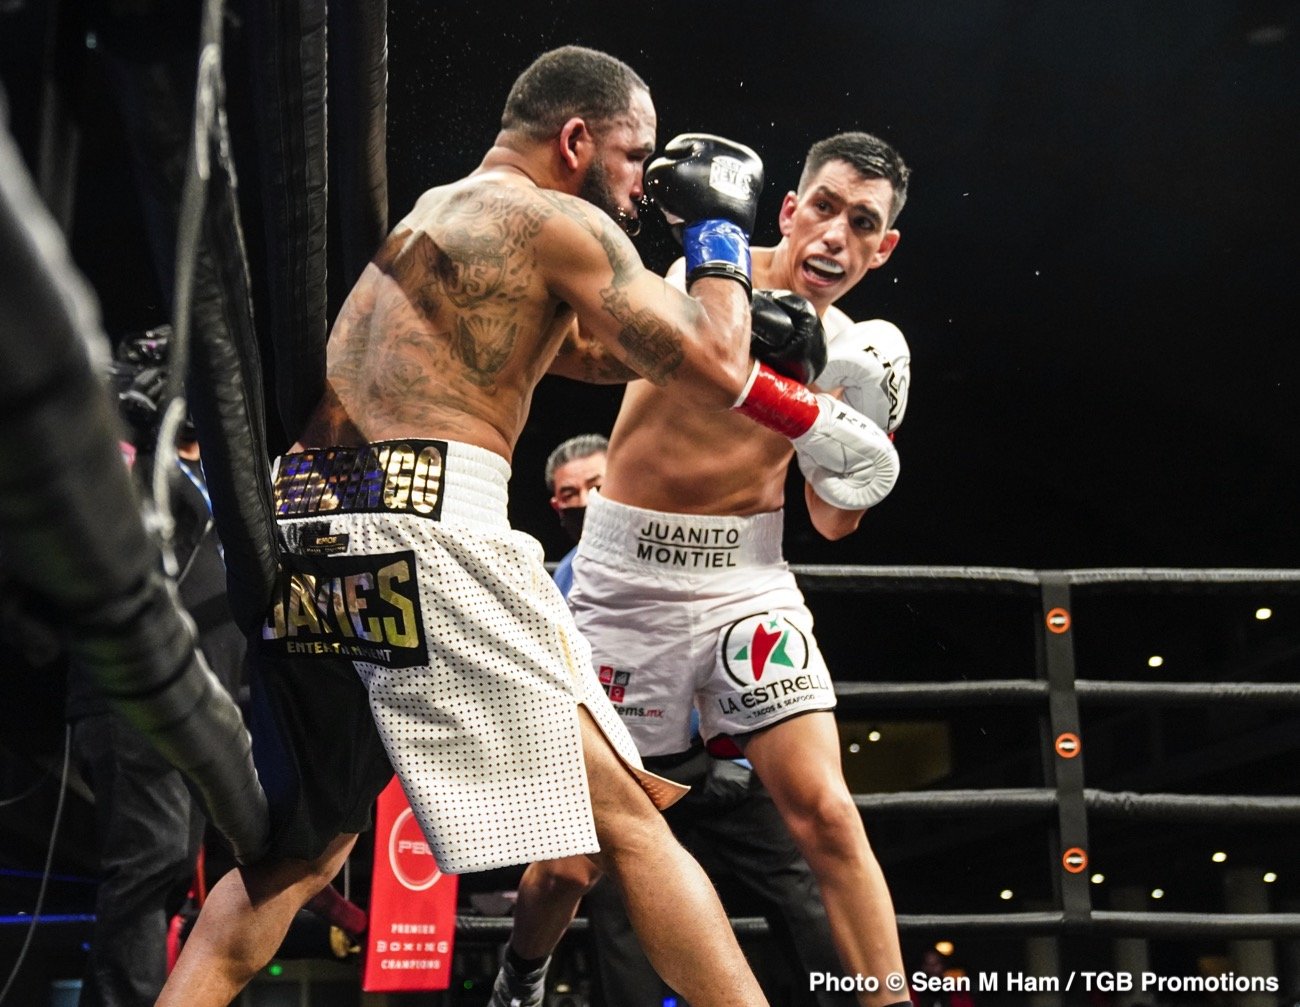 After First-Round KO Loss To Montiel, Surely The End For James Kirkland